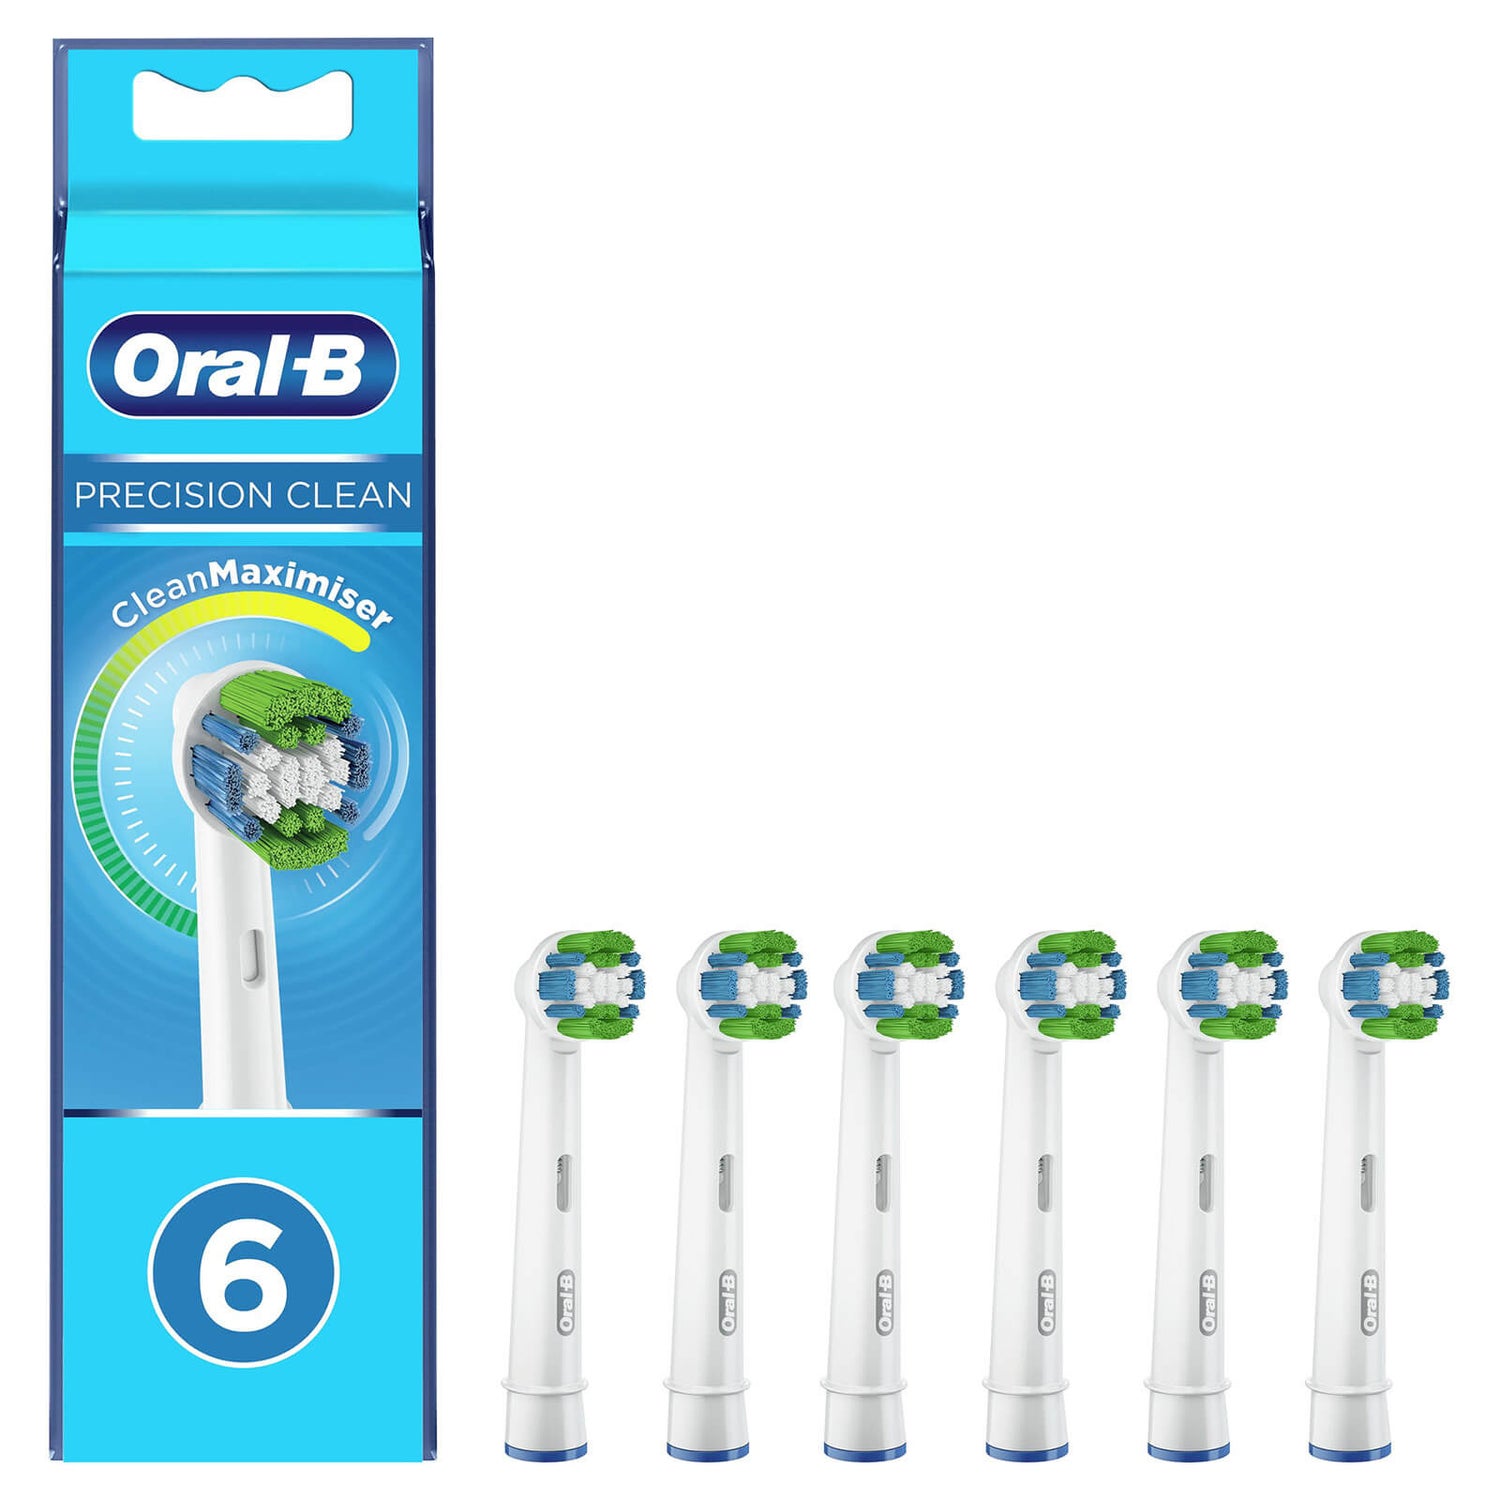 Oral-B Precision Clean Toothbrush Head with CleanMaximiser Technology, Pack of 6 Counts